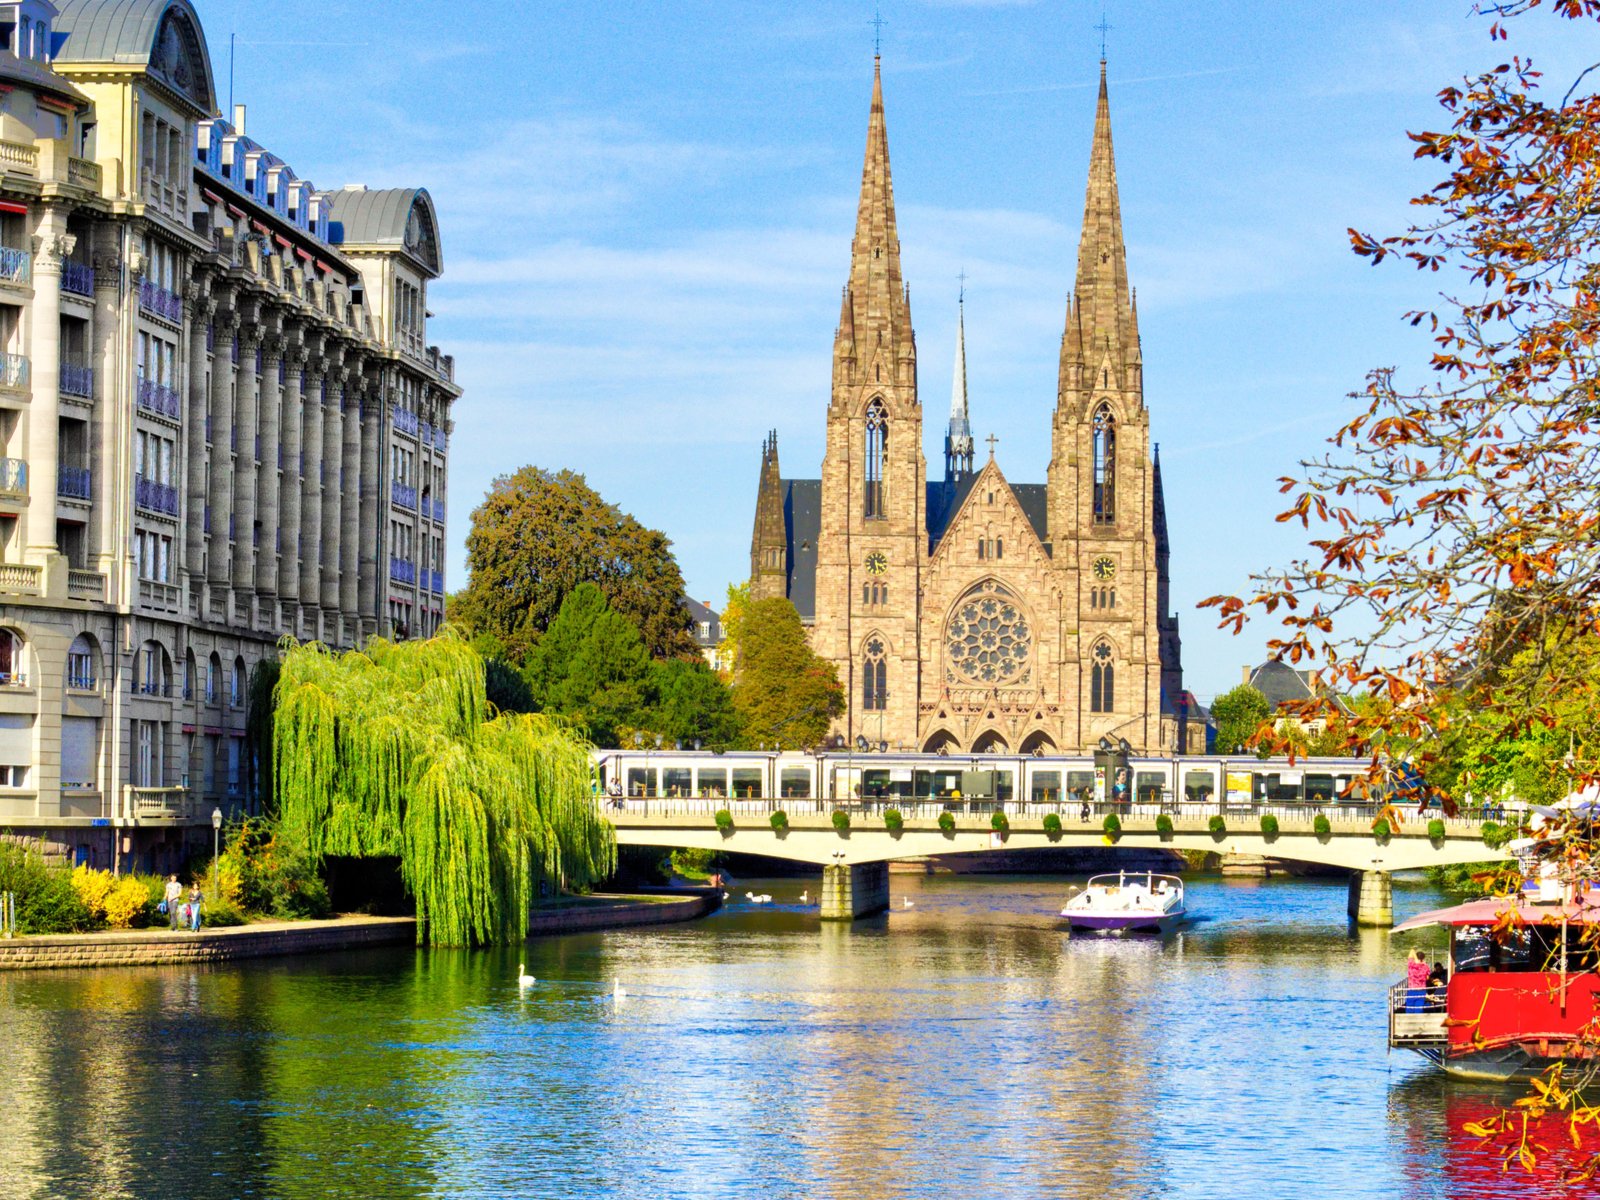 With its old&nbsp;timber-framed&nbsp;houses,&nbsp;flower&nbsp;pots and&nbsp;canals, Strasbourg has a collection&nbsp;of picture postcard&nbsp;subjects.

